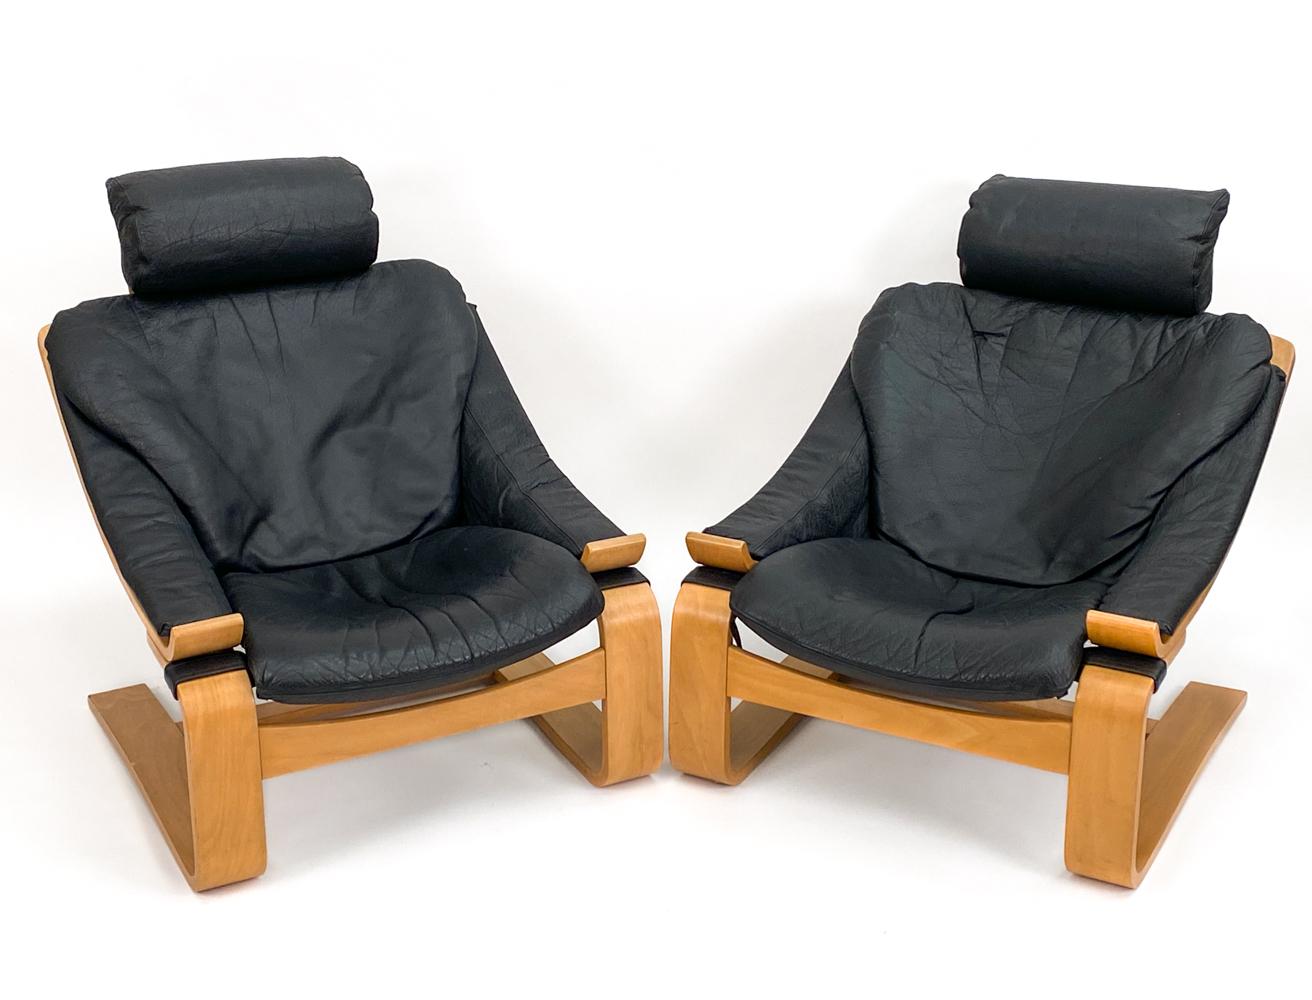 '4' Kroken Buffalo Leather Lounge Chairs by Åke Fribytter for Nelo Sweden, 1970s In Good Condition For Sale In Norwalk, CT